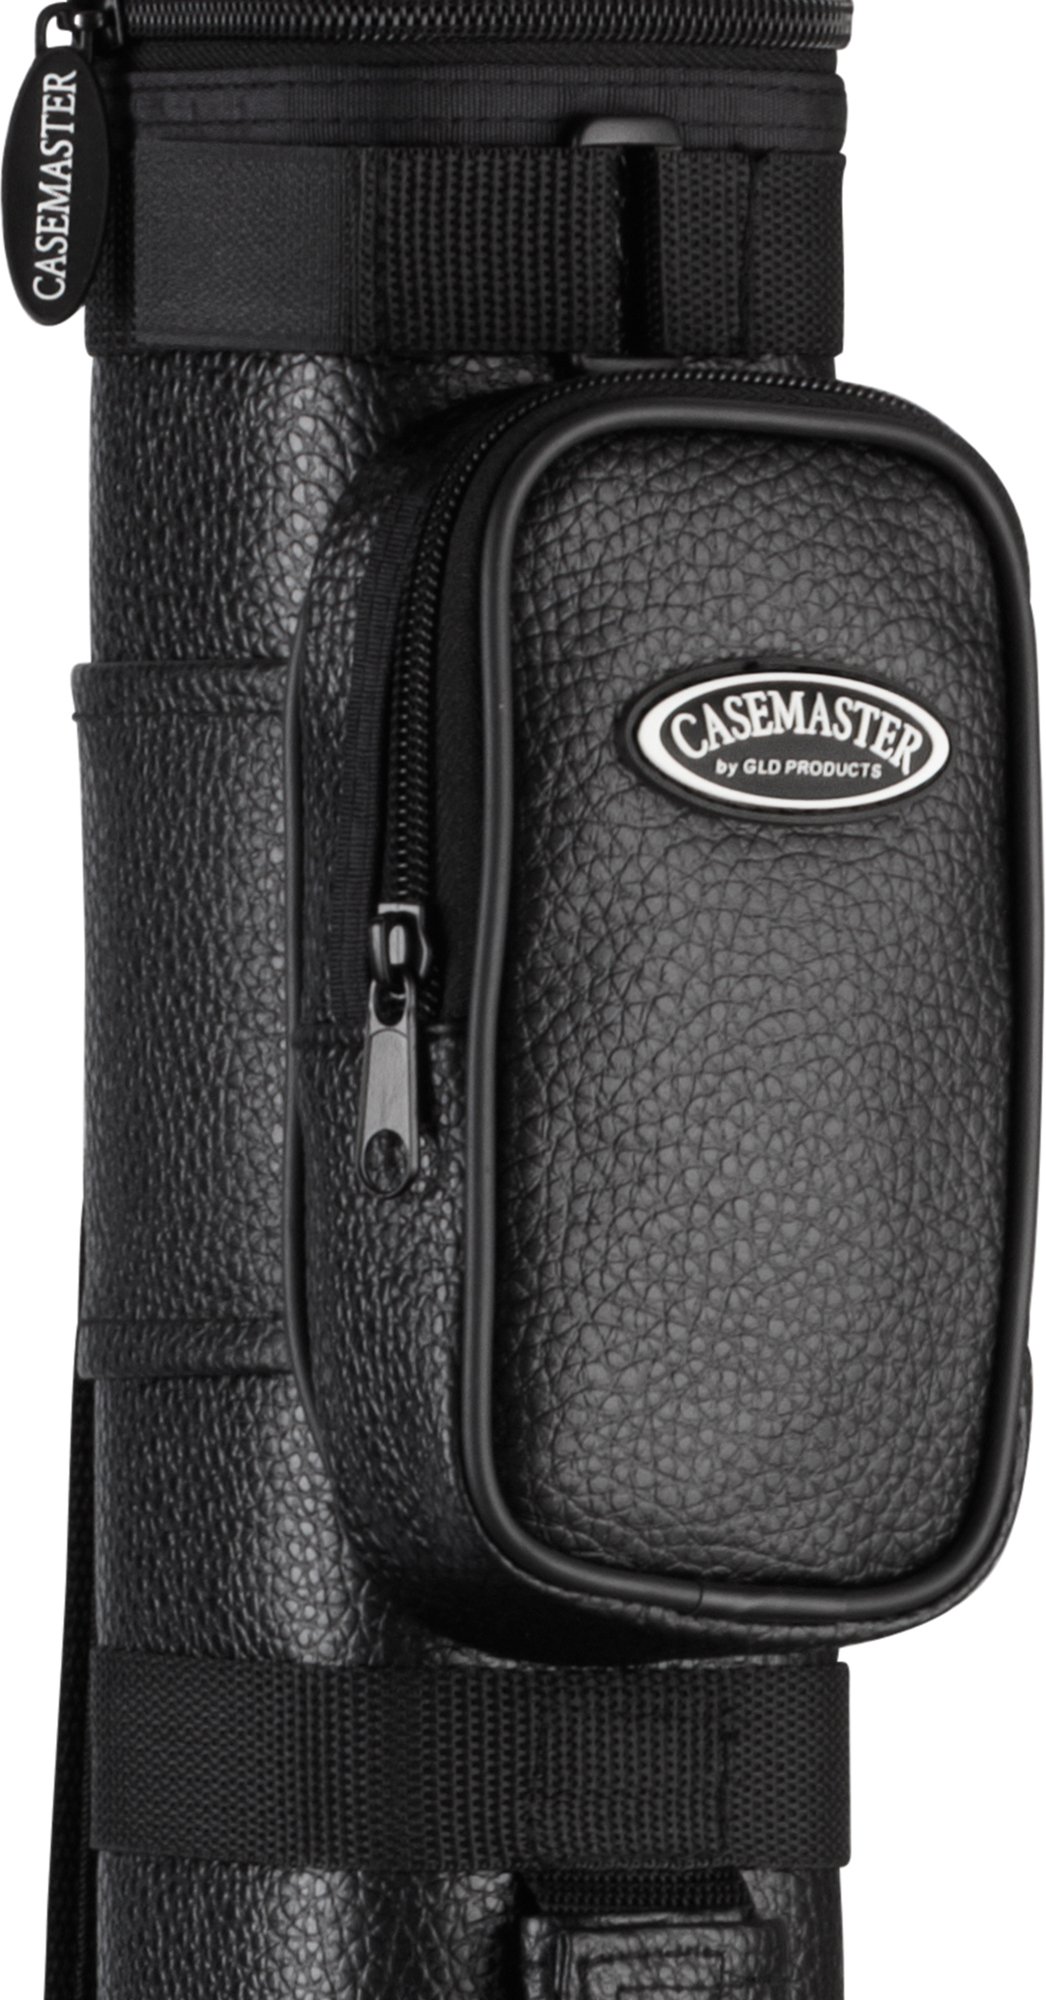 Casemaster by GLD Products Q-Vault Classic Billiard/Pool Cue Hard Case, Holds 2 Complete 2-Piece Cues (2 Butt/2 Shaft), Black